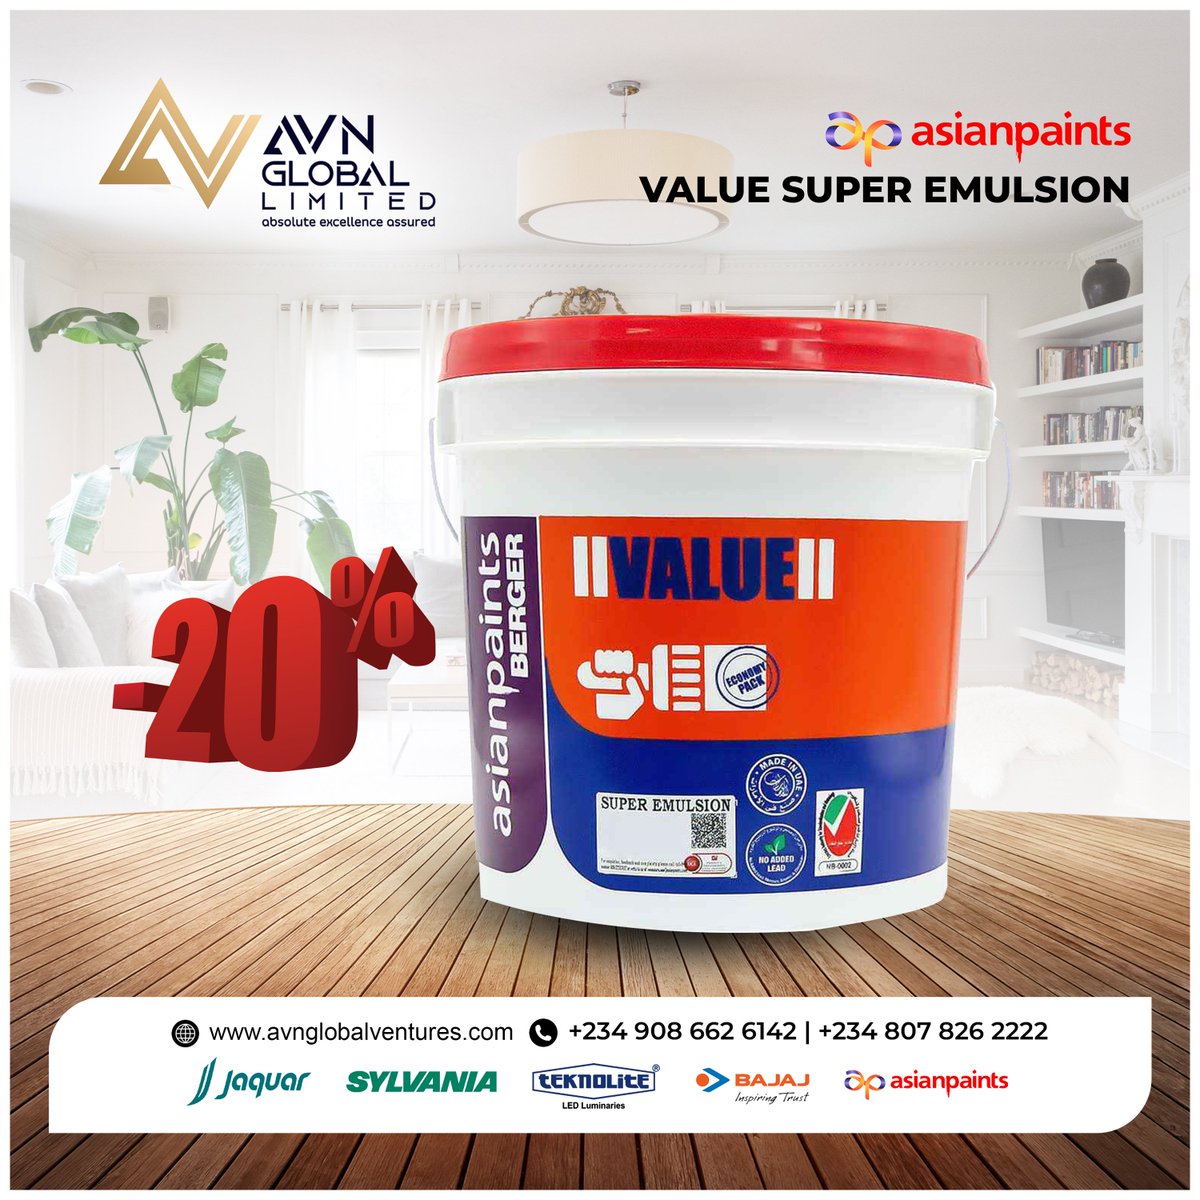 Transform your walls with Asian Paints Value Super Emulsion - now 20% off! Smooth, long-lasting coverage at an unbeatable price. 

#avnglobal #AsianPaints #WallPaint #HomeDecor #DIYSavings